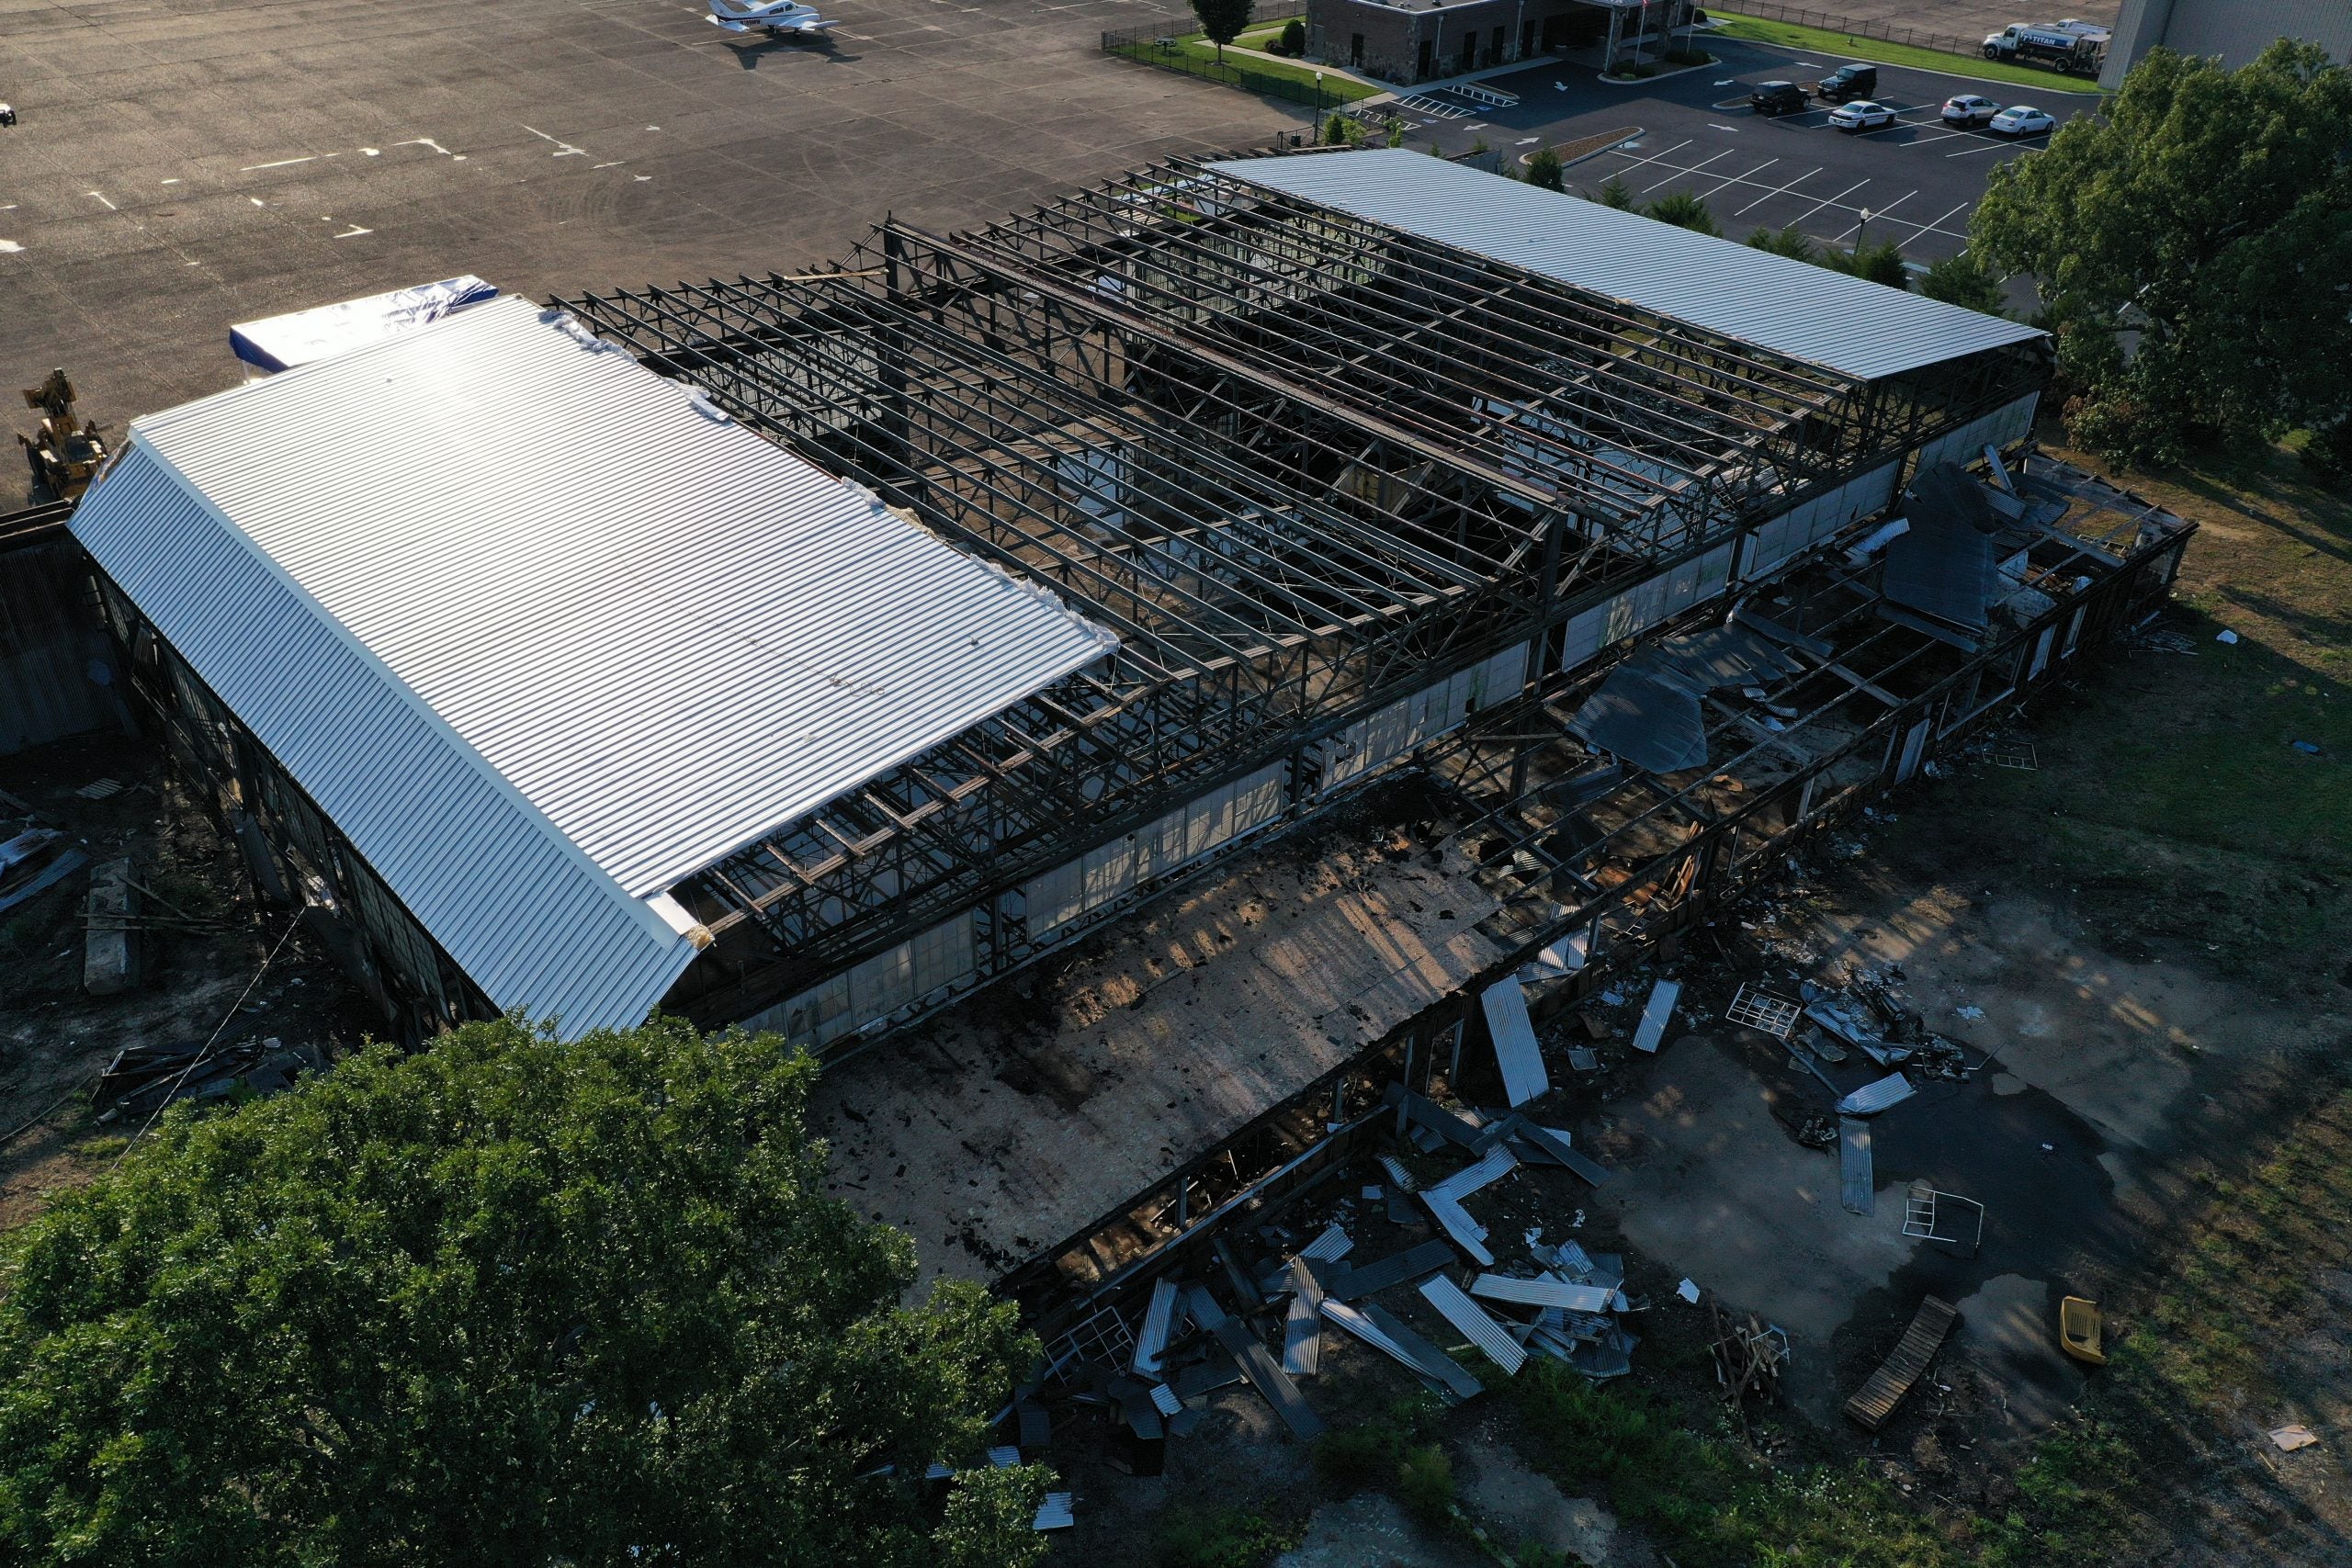 A look at some of the roof work being done on the hangar. “The roof was 40 percent caved in,” Williamson said.